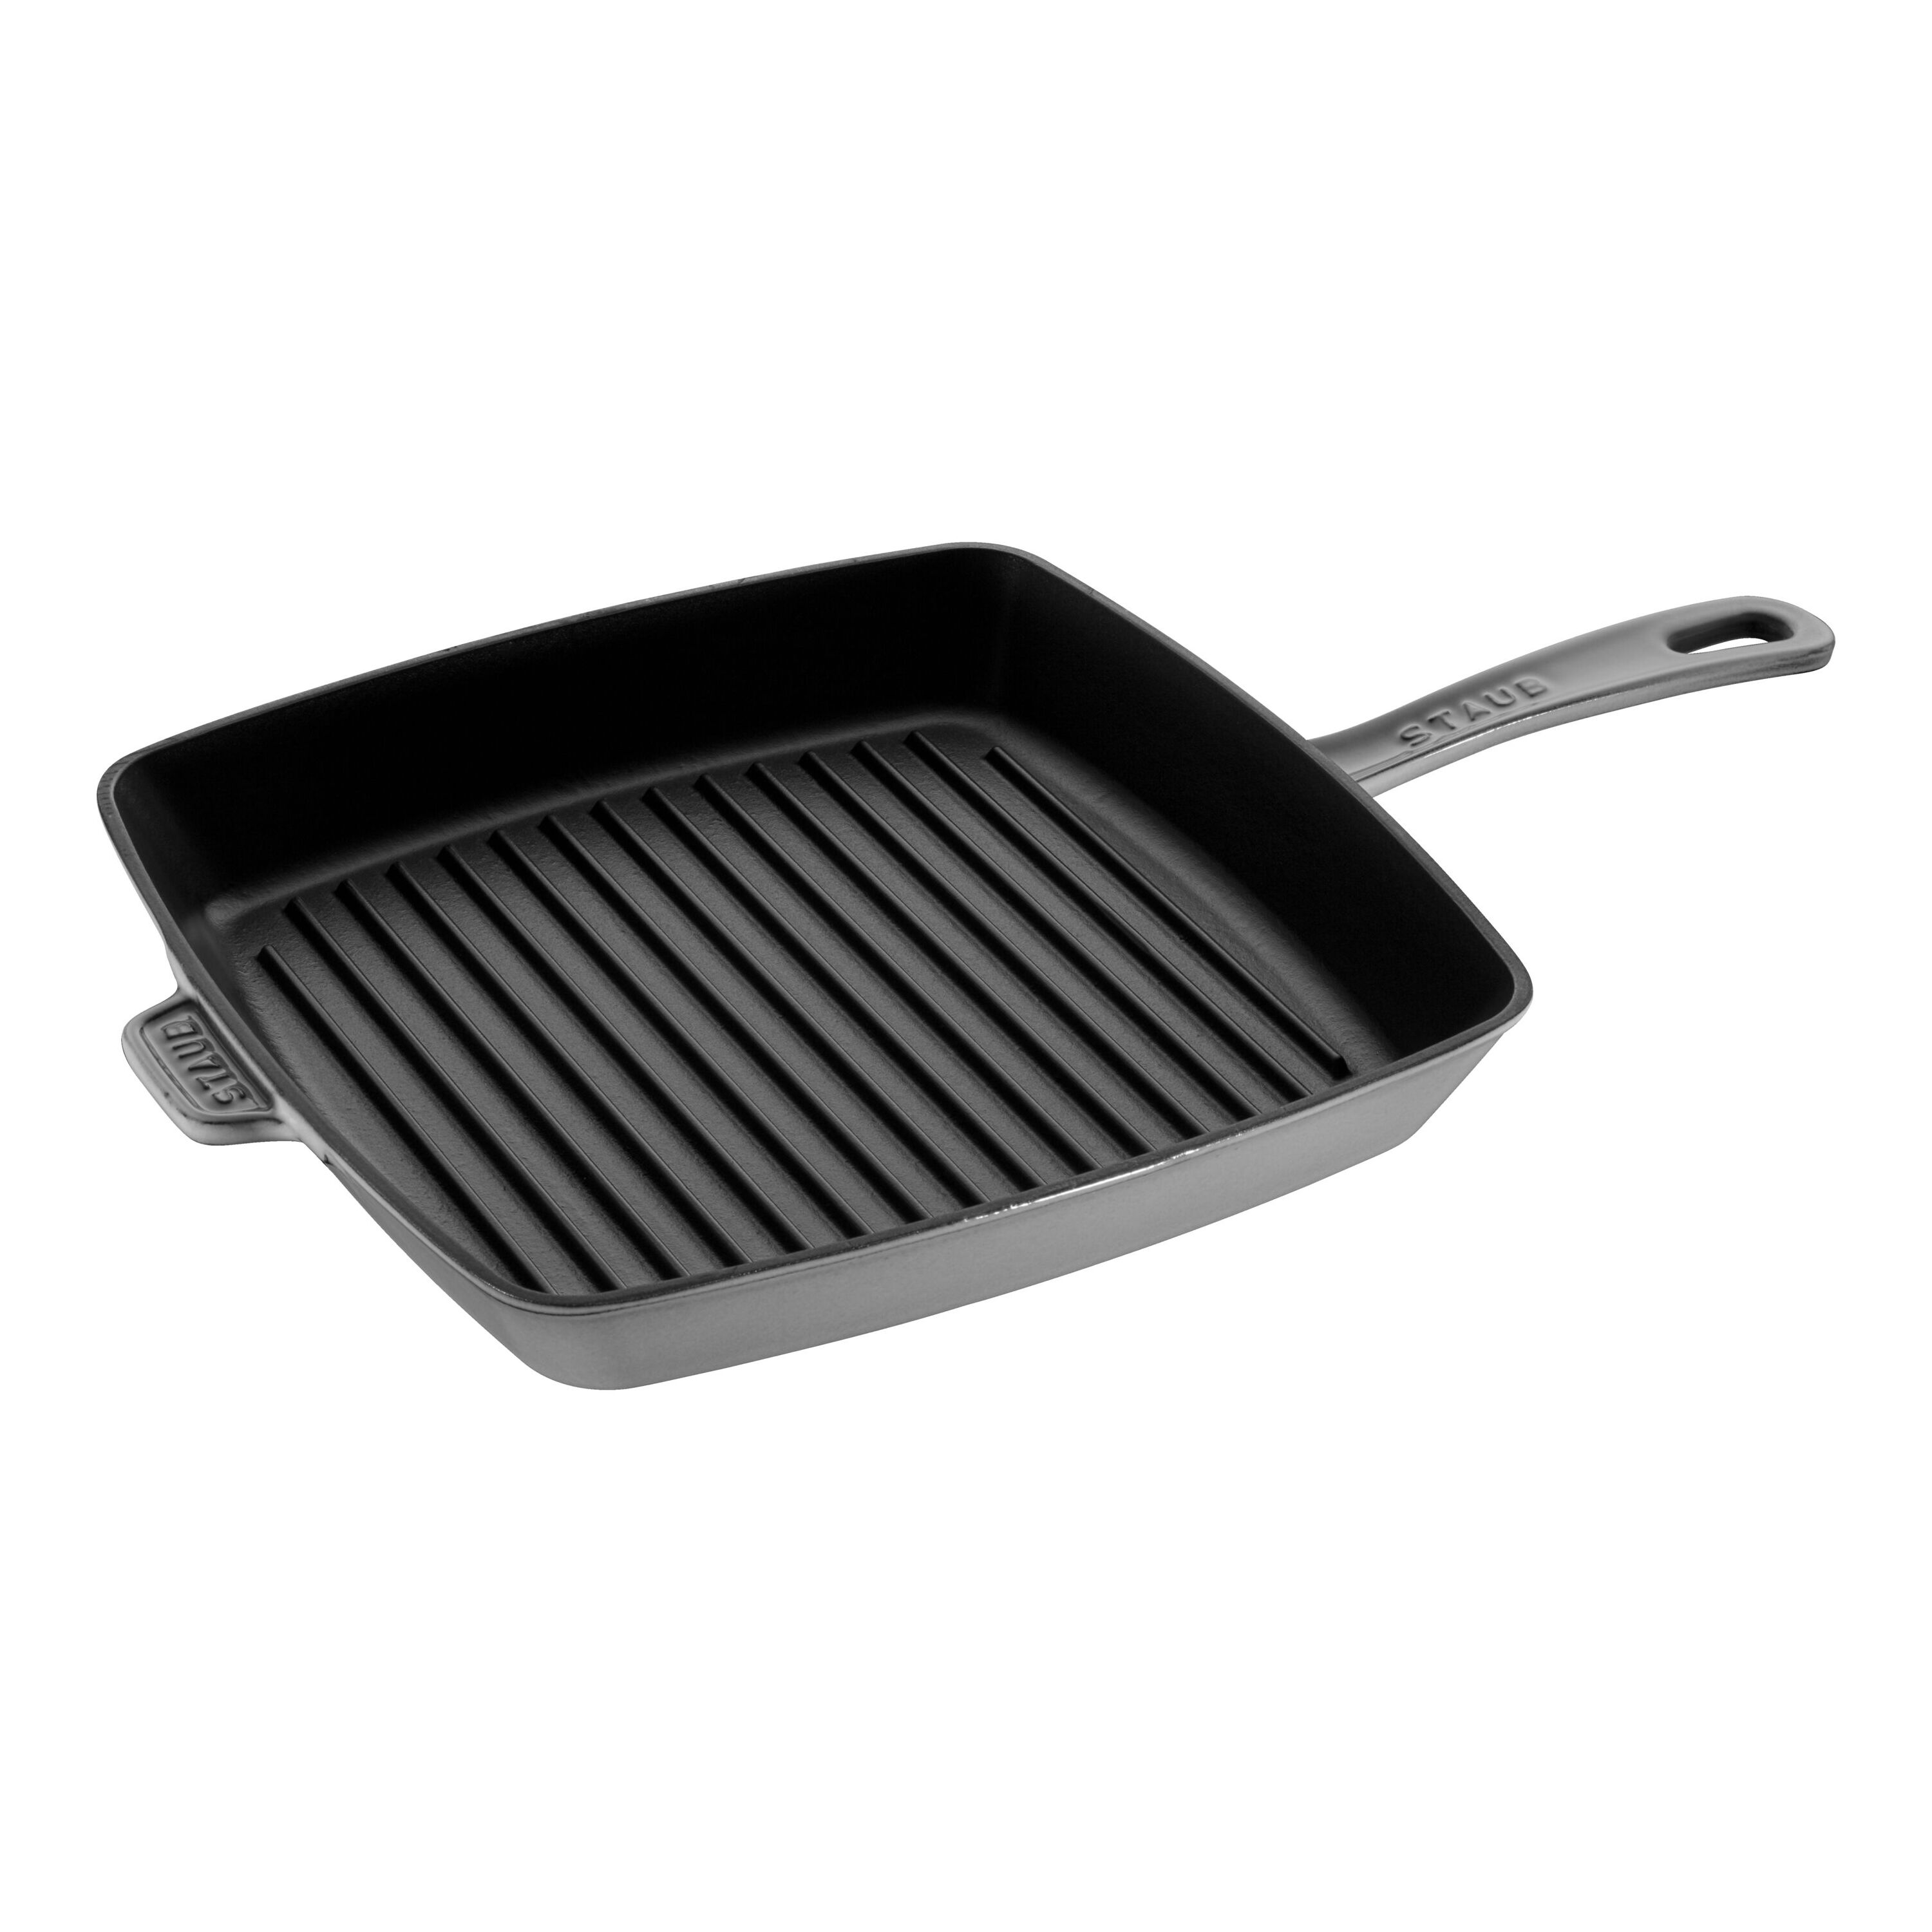 Staub 13 in. Cast Iron Specialty Pan Color: Graphite Gray